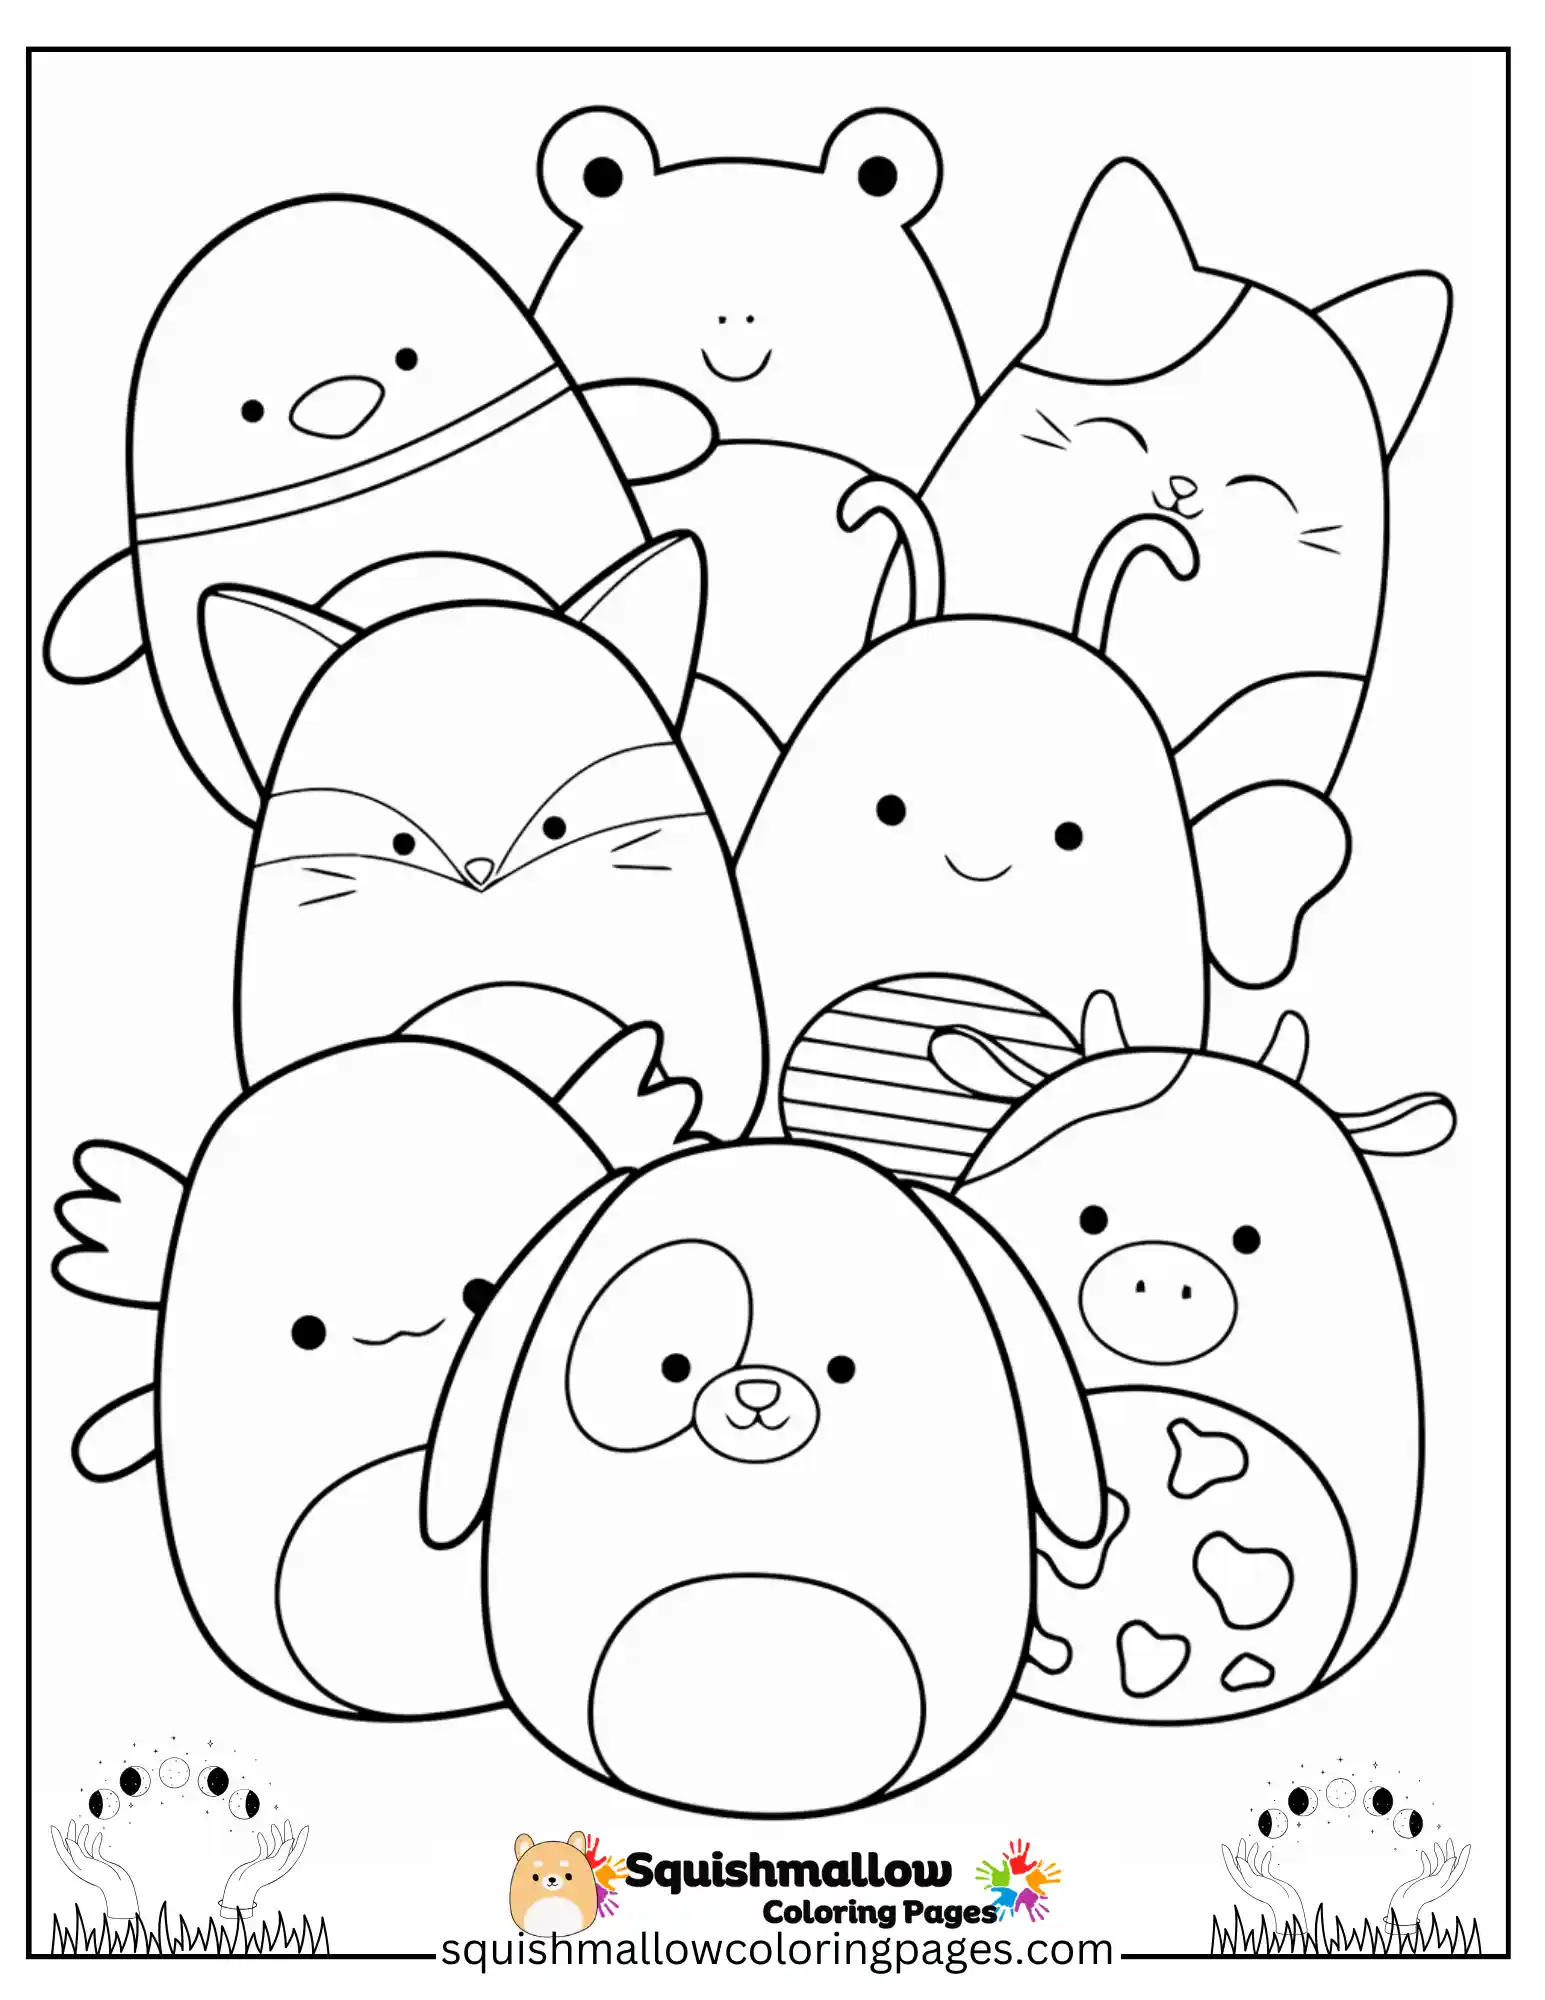 8 Squishmallows Coloring Pages